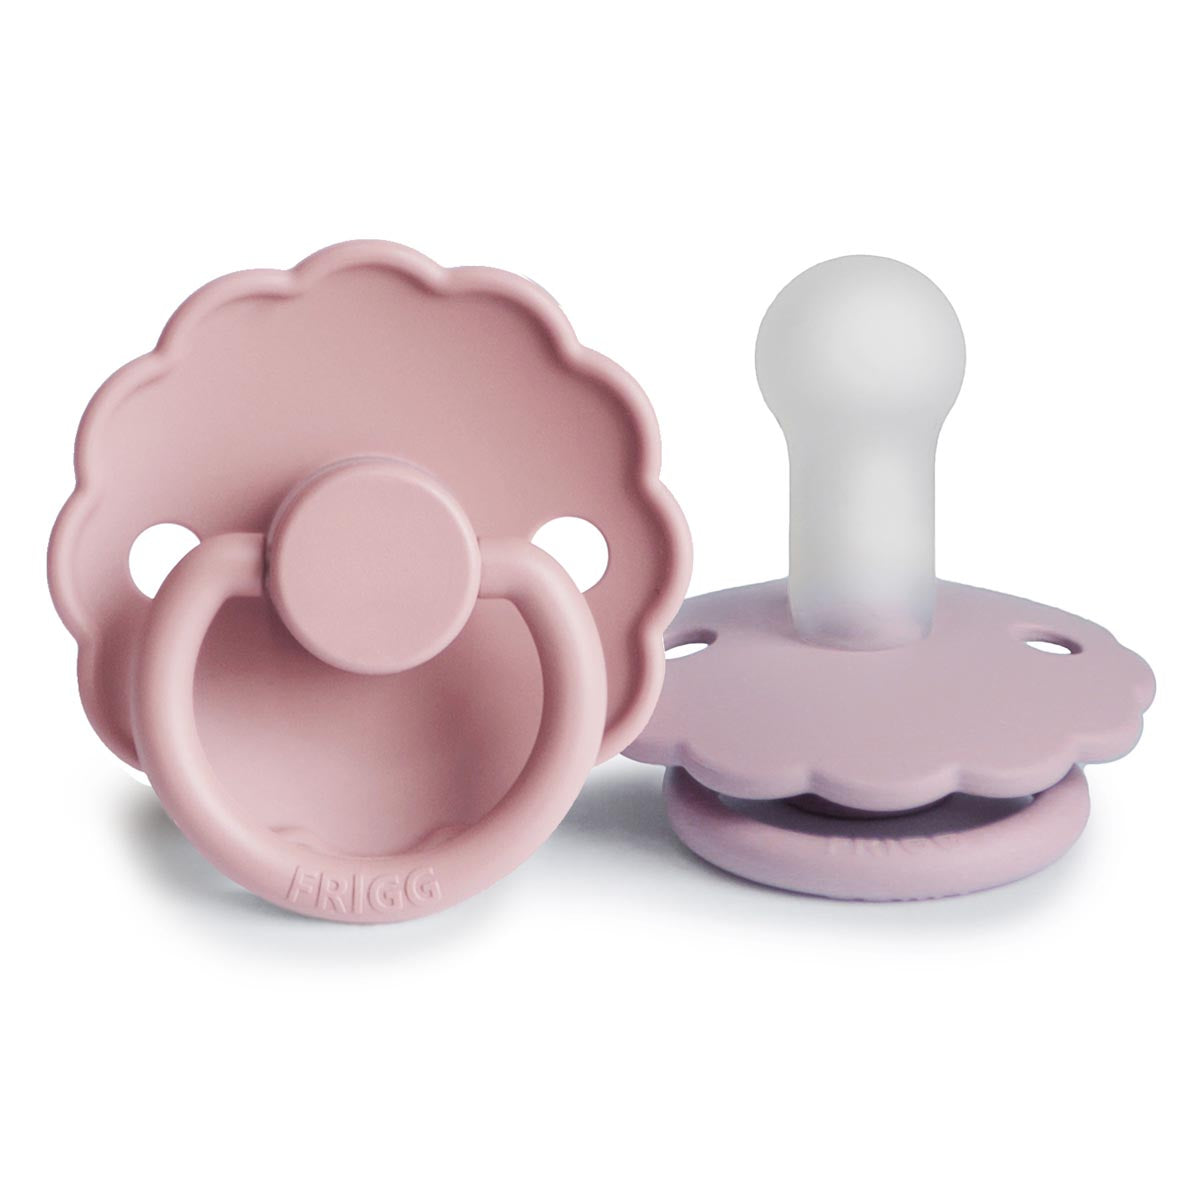 FRIGG Daisy Pacifier 2 Pack Silicone